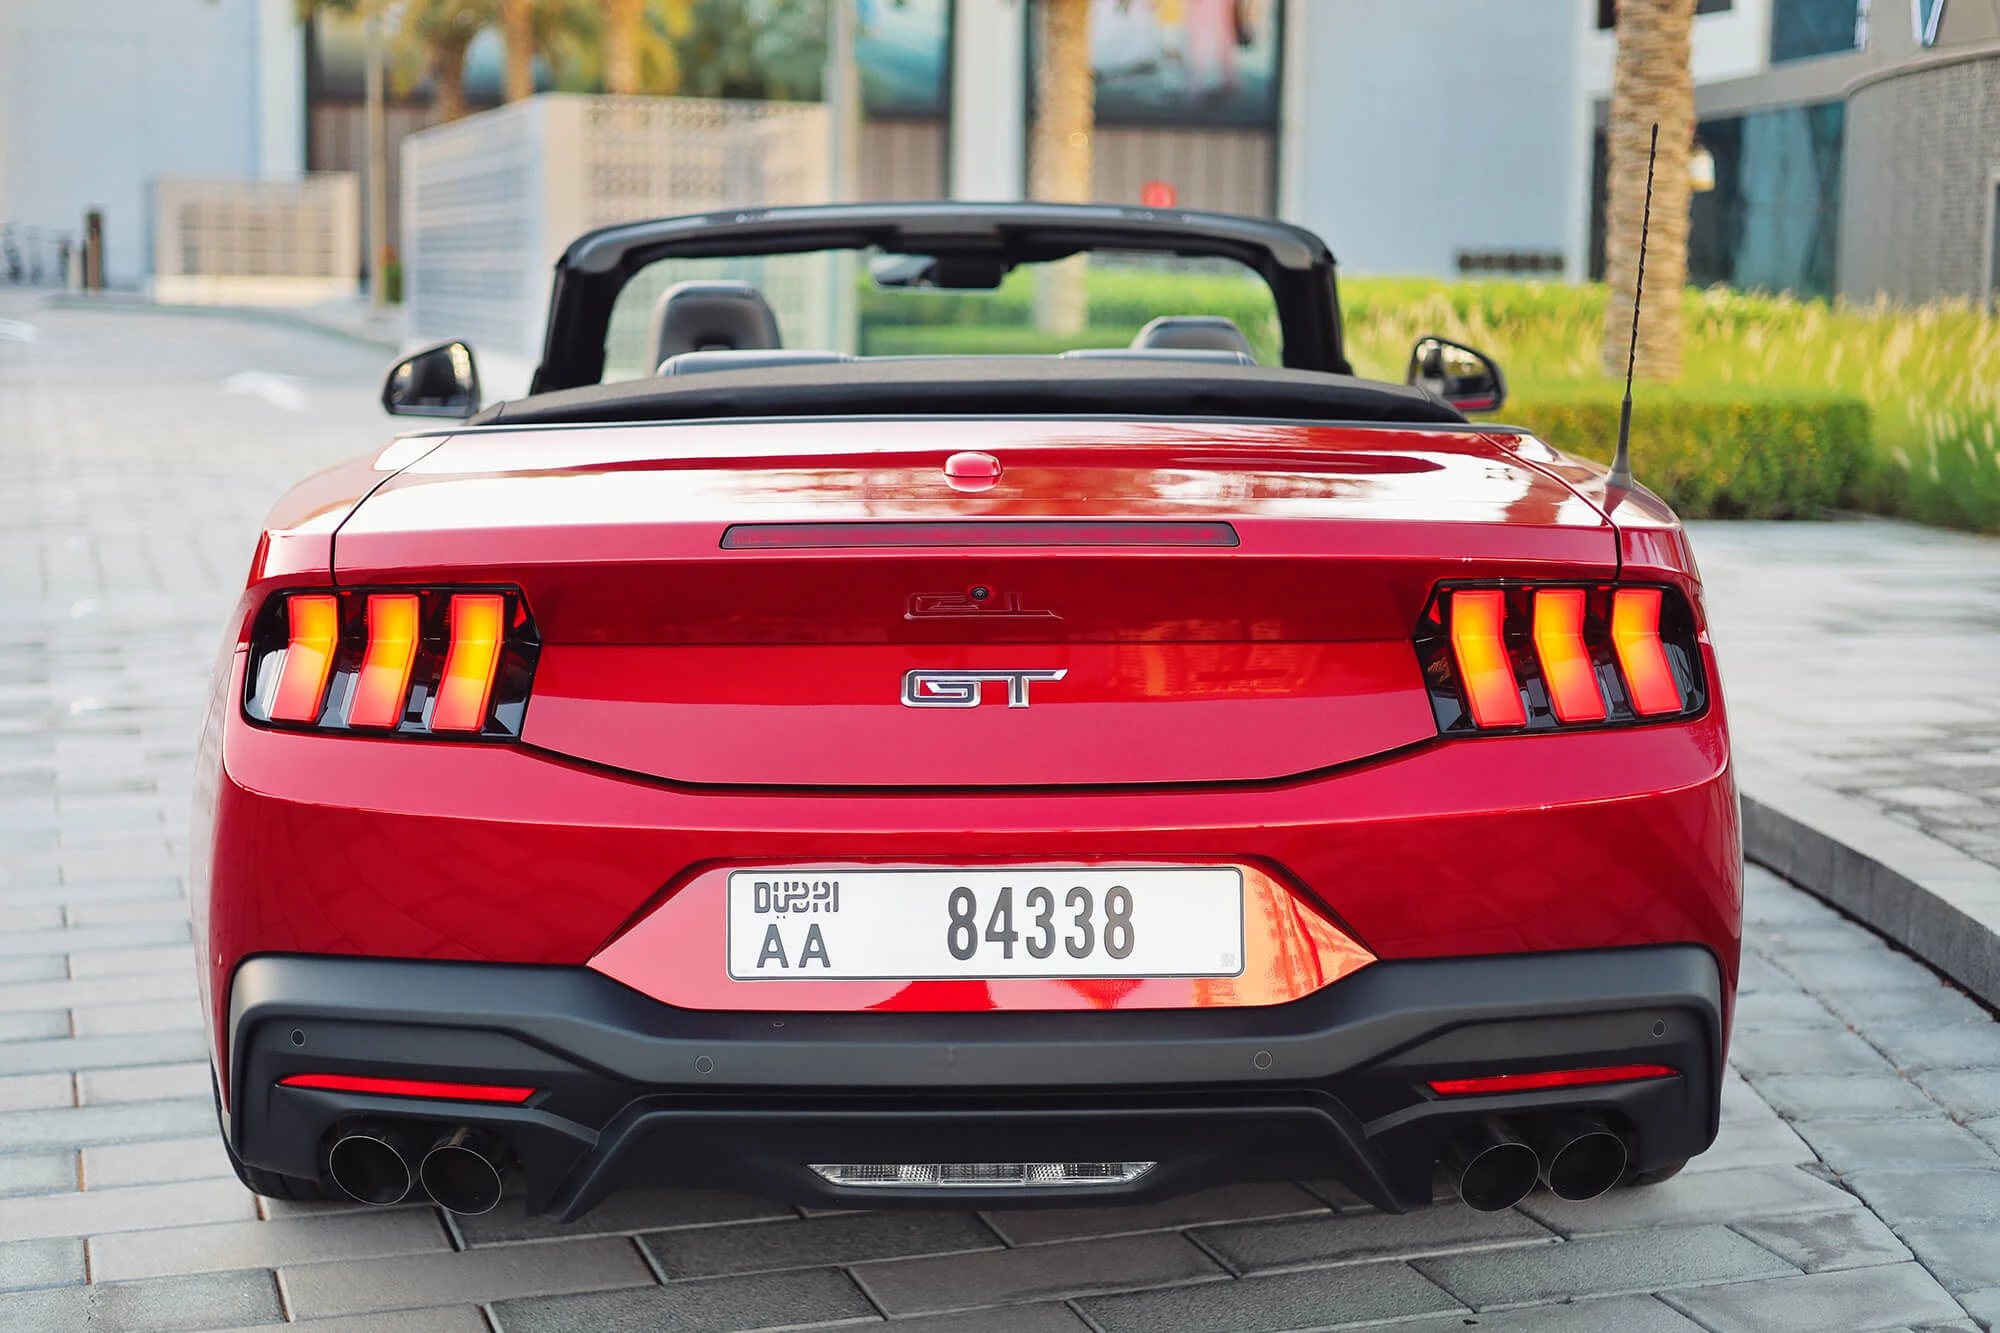 Mustang GT Rojo Descapotable Restyling